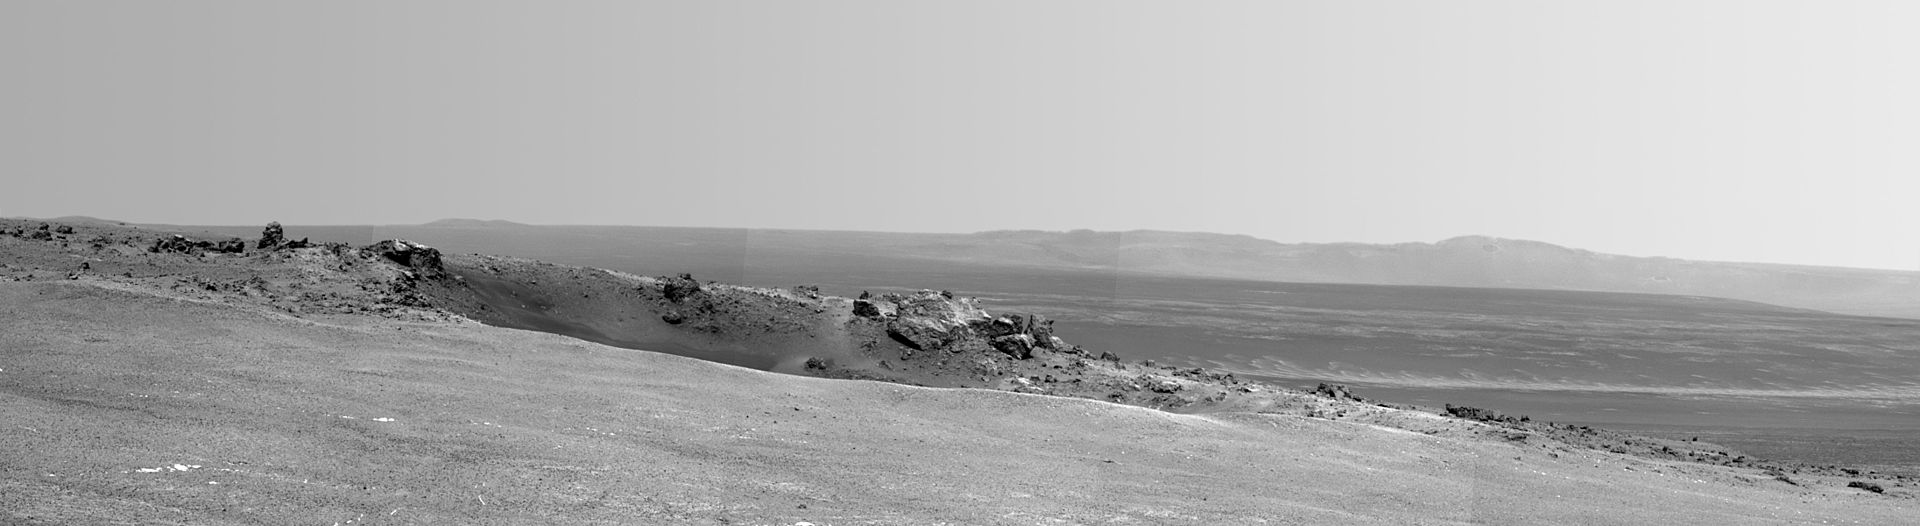 pia14509_arrival_at_spirit_point_by_mars_rover_opportunity.jpg